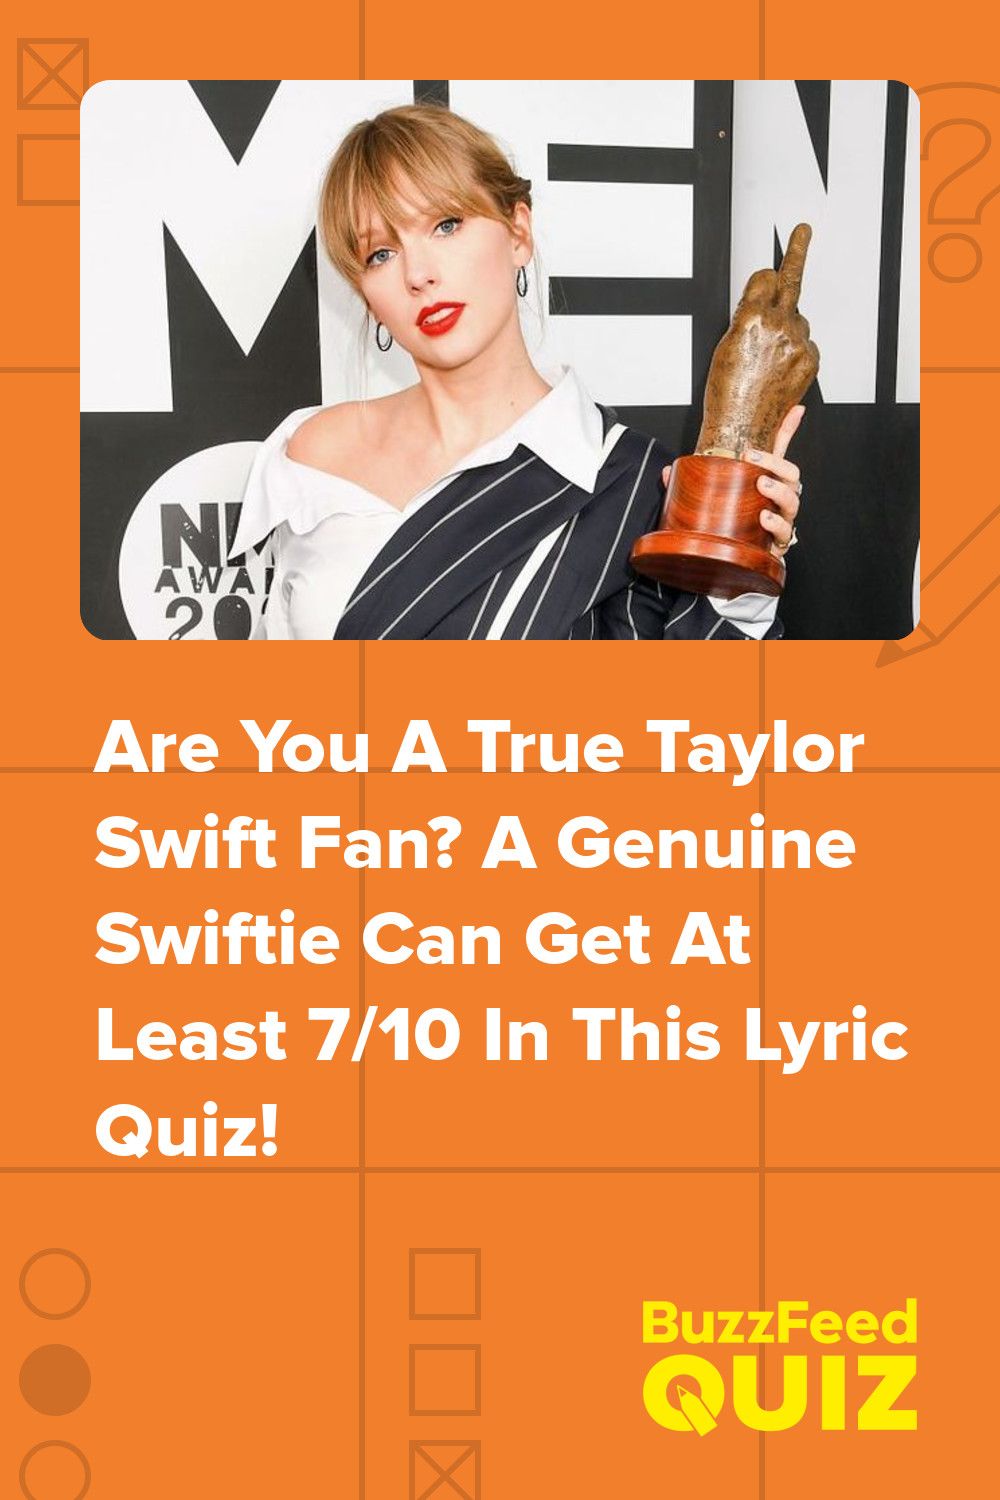 Which Taylor Swift song contains the lyrics 'I could show you incredible things'?